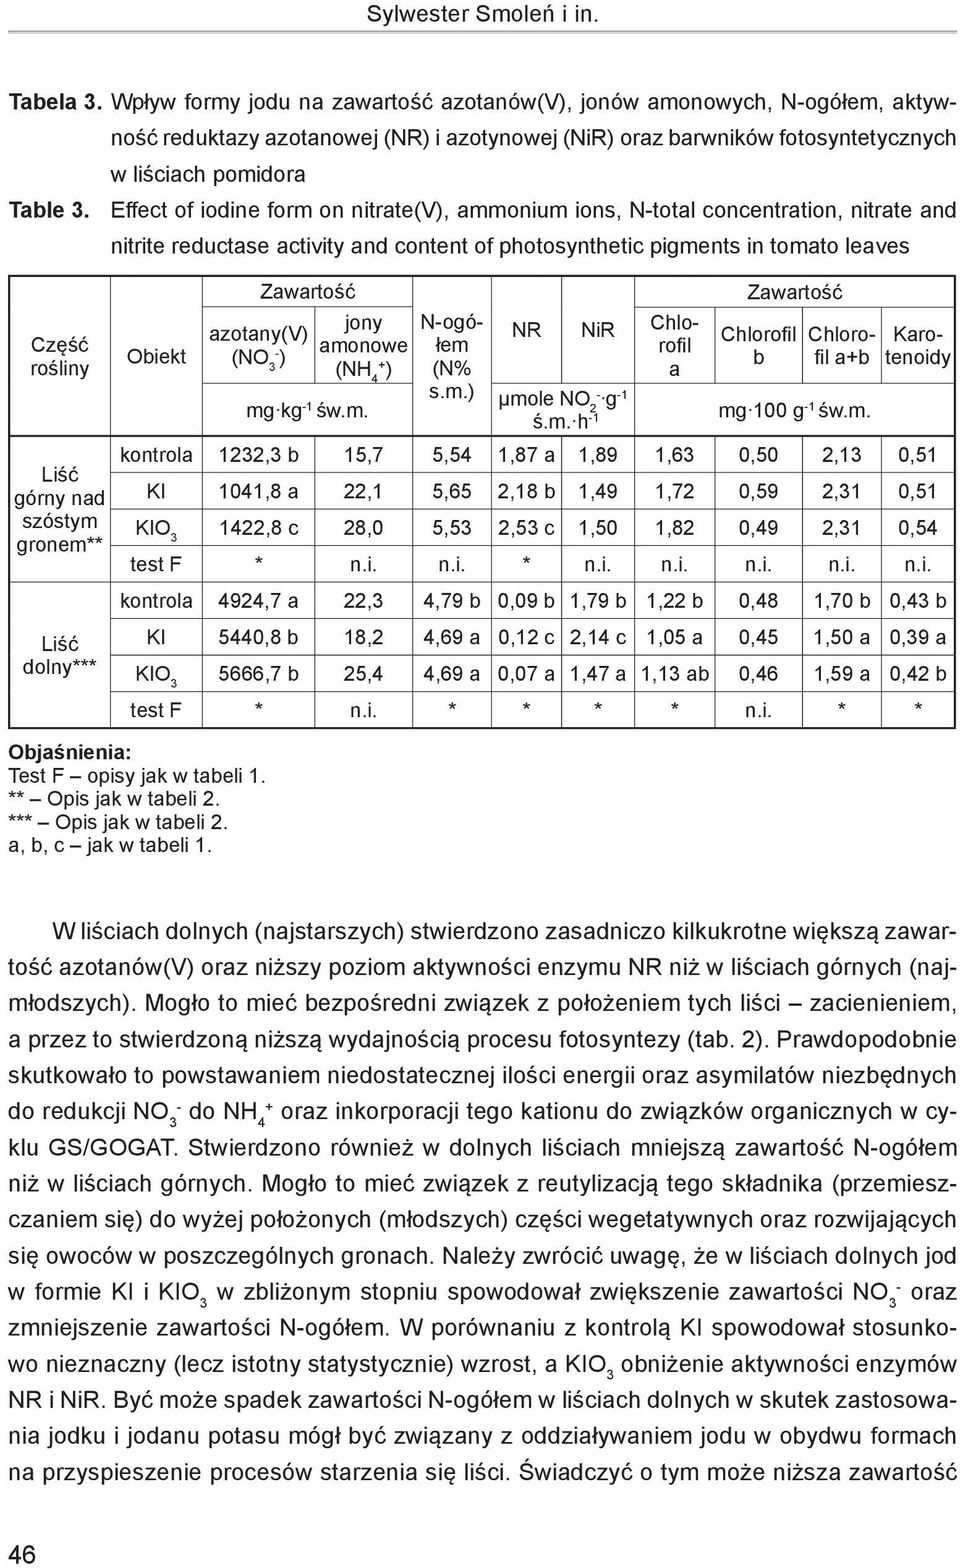 Effect of iodine form on nitrate(v), ammonium ions, Ntotal concentration, nitrate and nitrite reductase activity and content of photosynthetic pigments in tomato leaves Część rośliny Liść górny nad